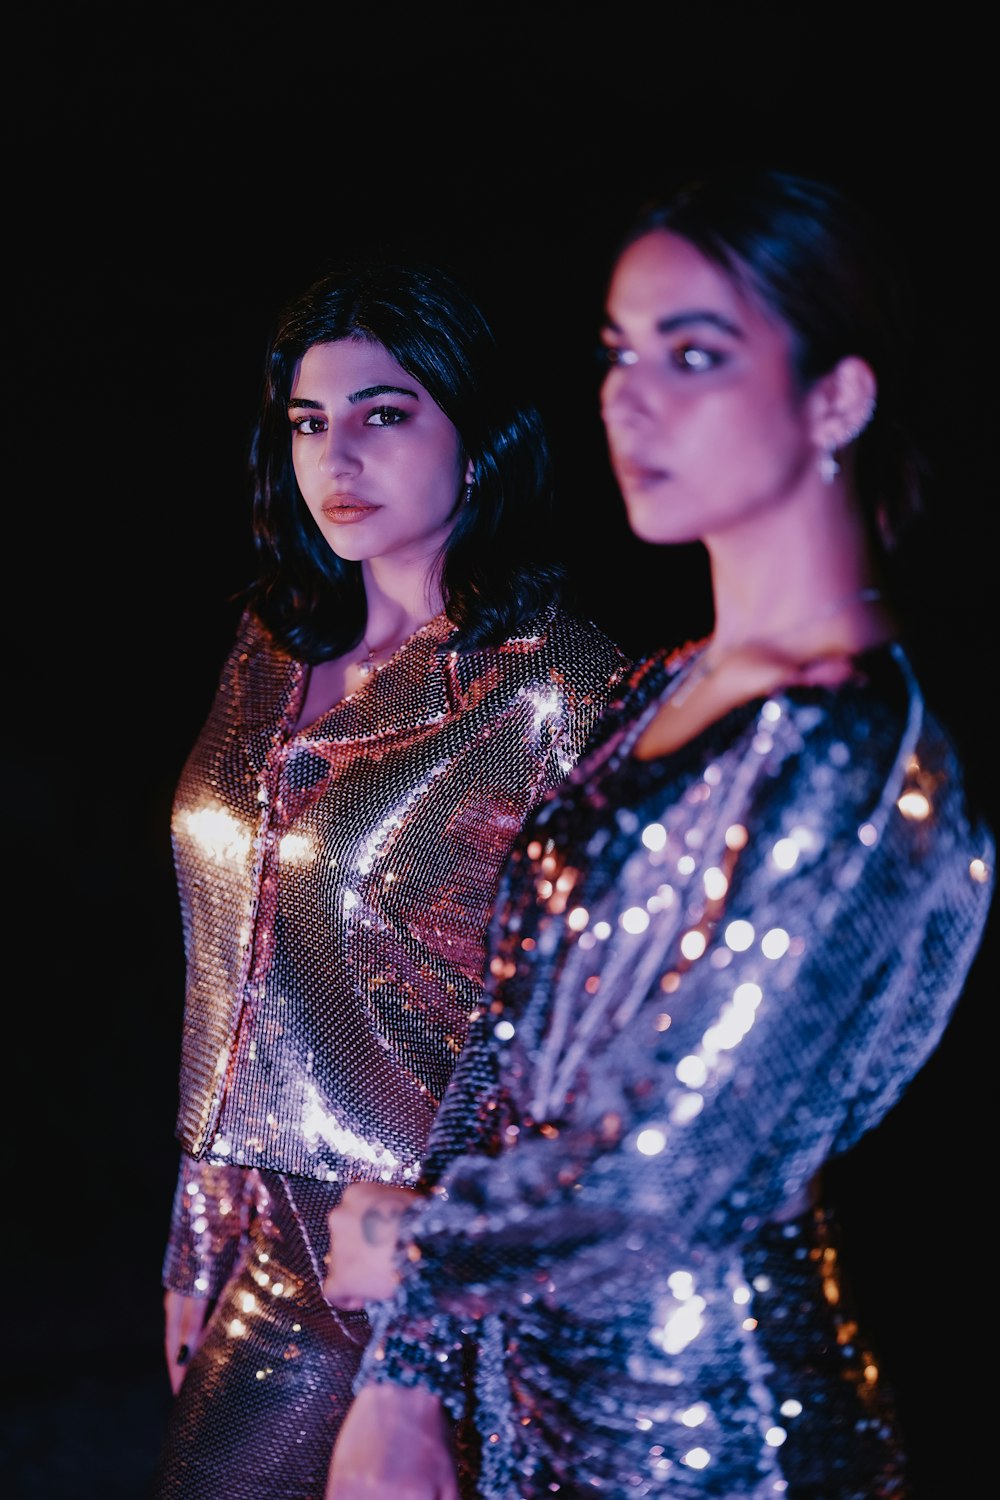 two women standing next to each other in shiny outfits